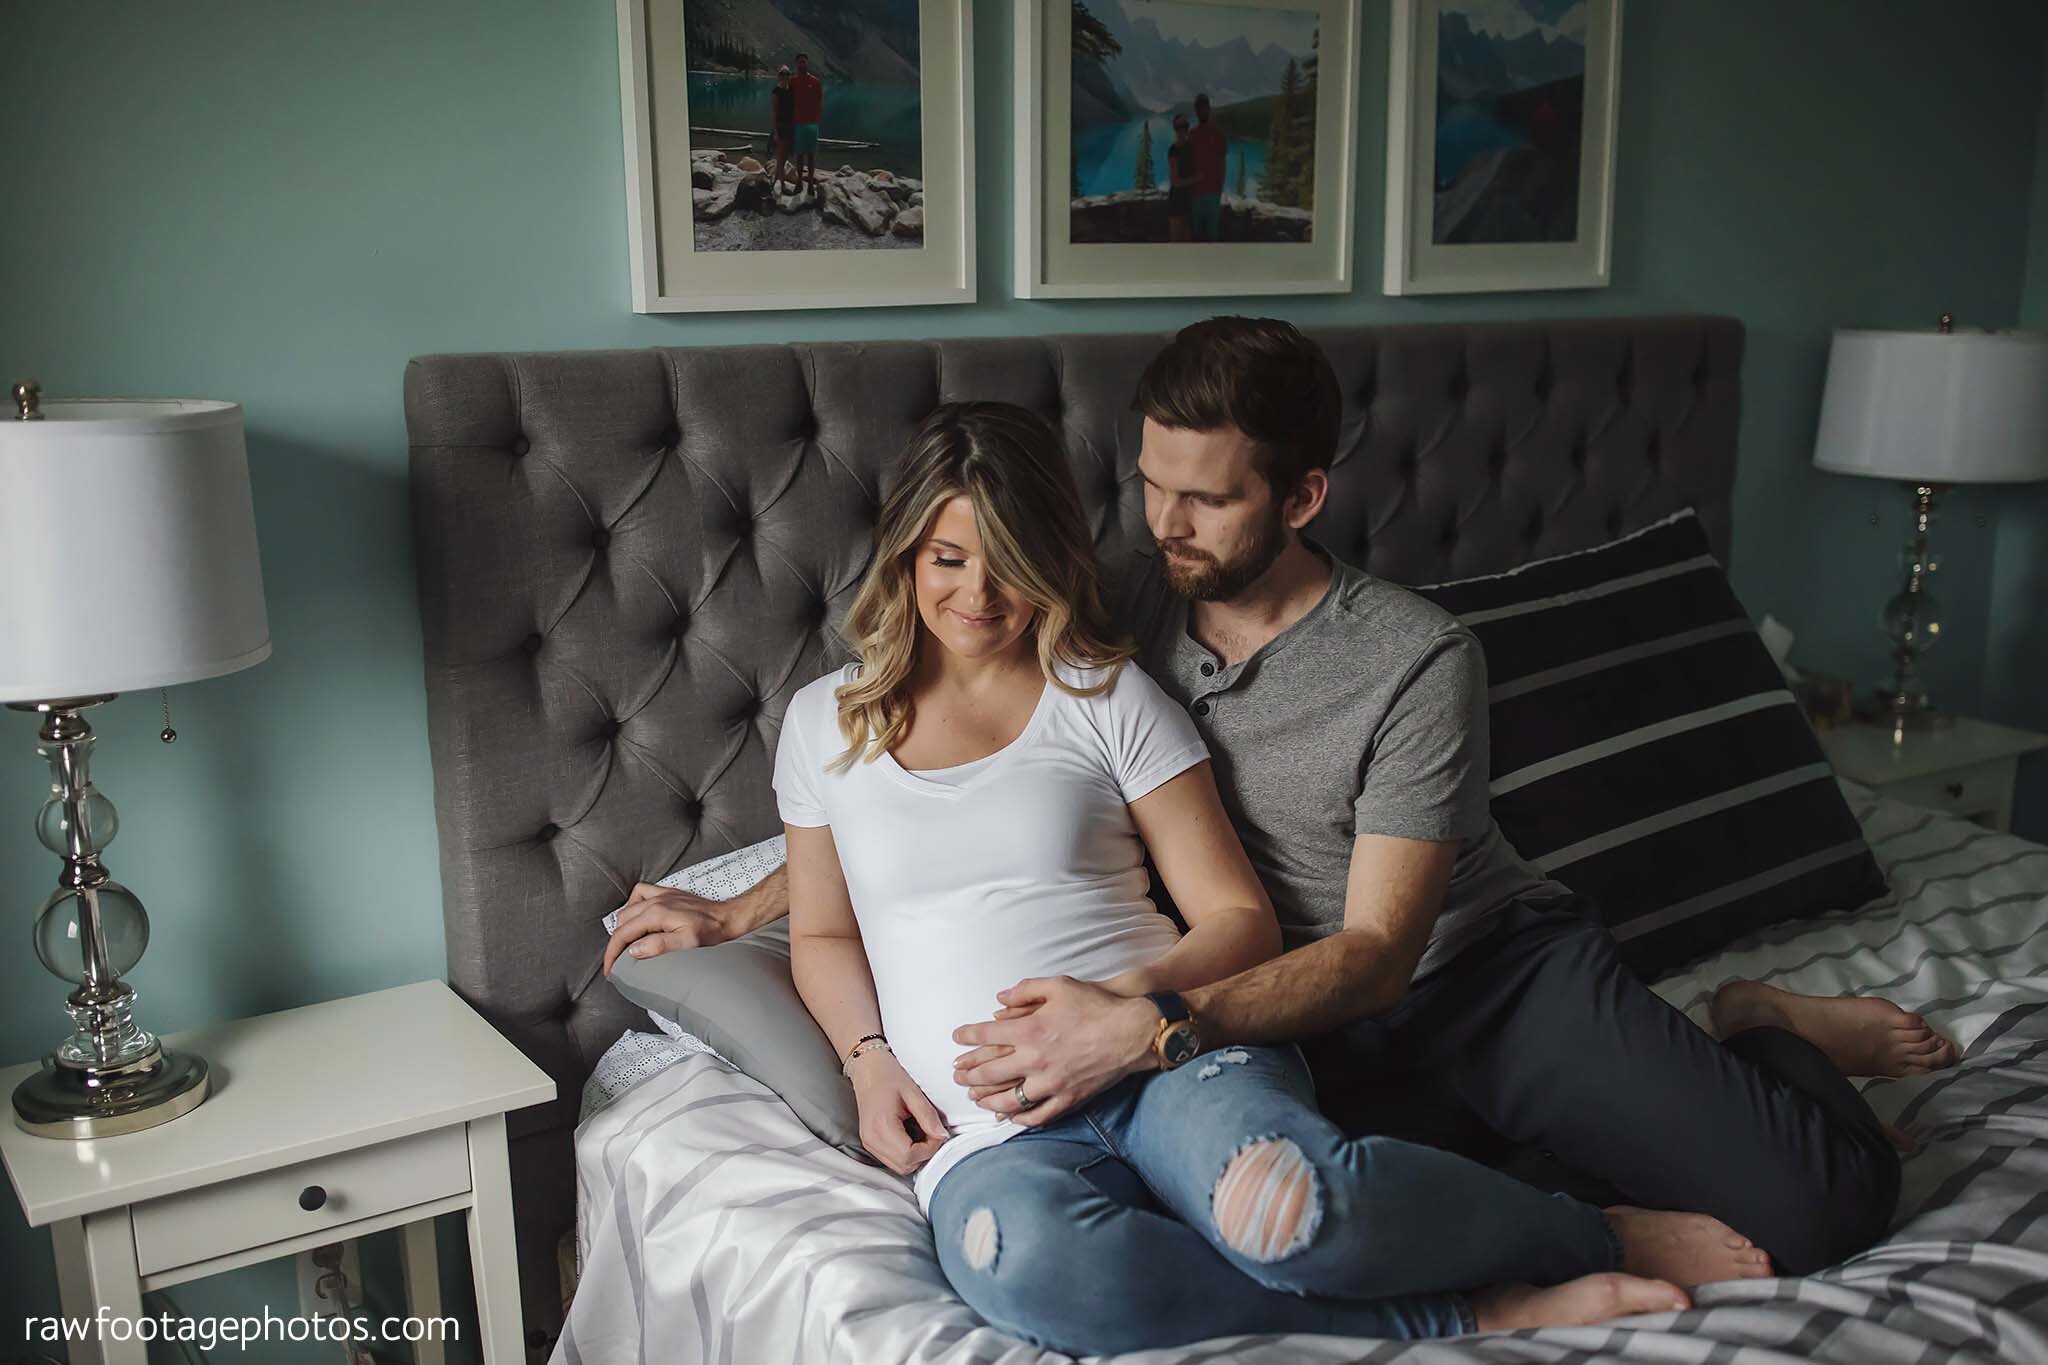 london_ontario_maternity_photographer-raw_footage_photography-in_home_lifestyle_maternity-forest_maternity_session-yellow_maternity_dress_006.jpg